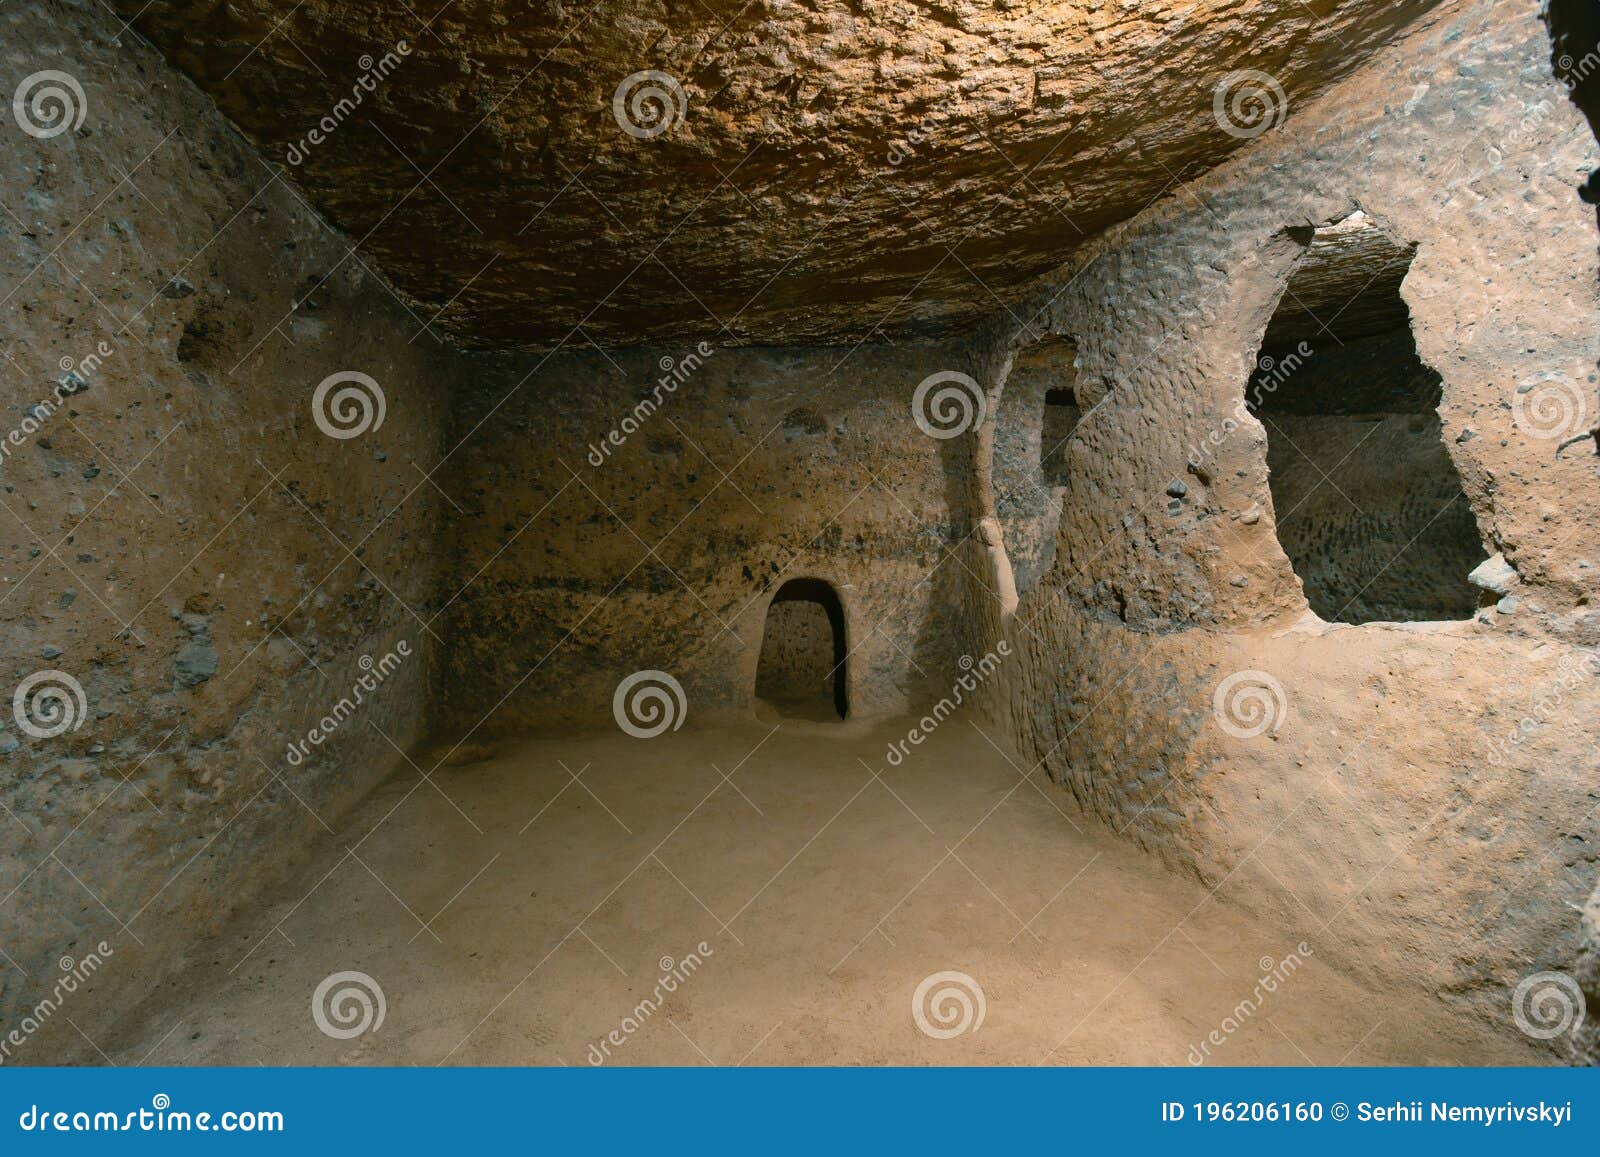 the interior of an ancient underground city on the territory of cappadocia. rooms deep underground. the concept of tourism and